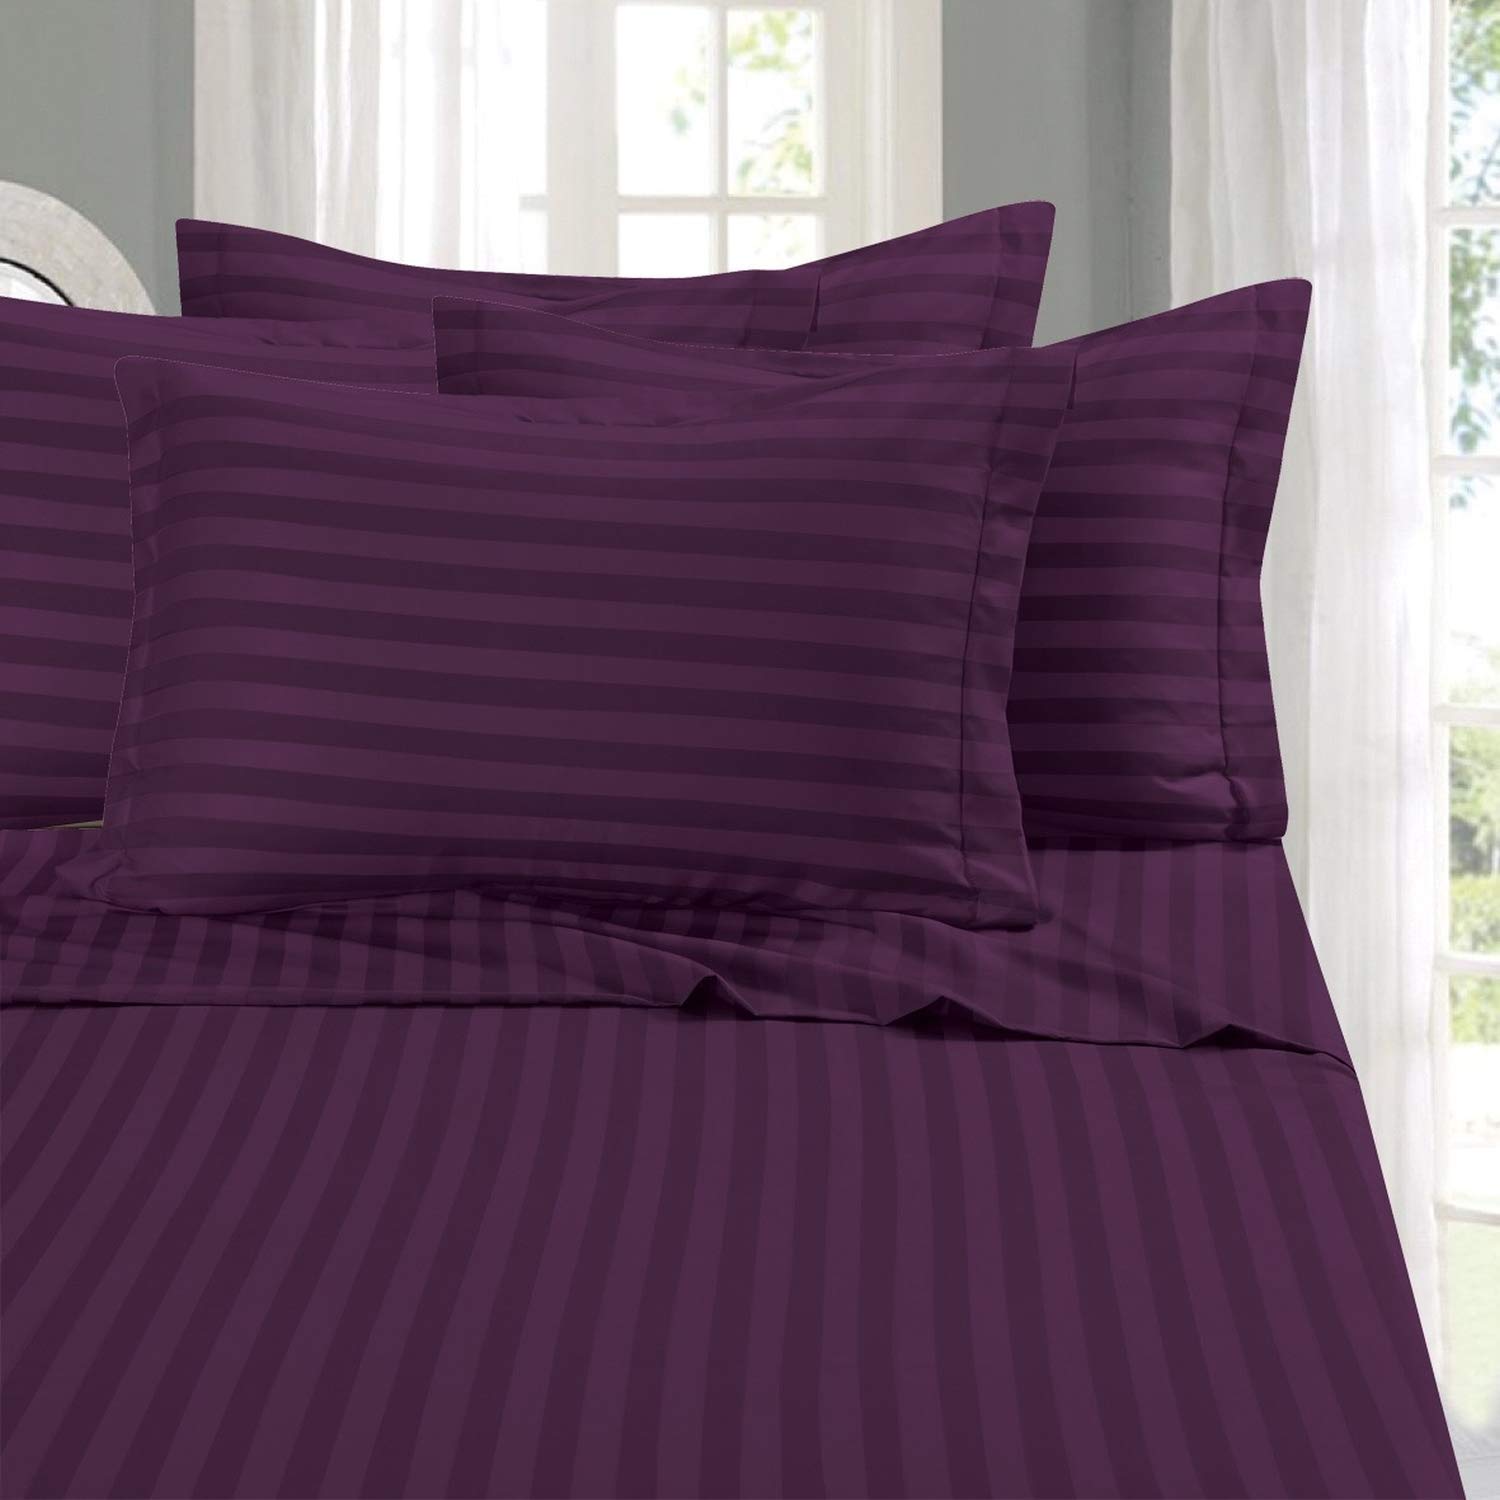 Book Cover Elegant Comfort Best, Softest, Coziest 6-Piece Sheet Sets! - 1500 Thread Count Egyptian Quality Luxurious Wrinkle Resistant 6-Piece Damask Stripe Bed Sheet Set, King Eggplant/Purple